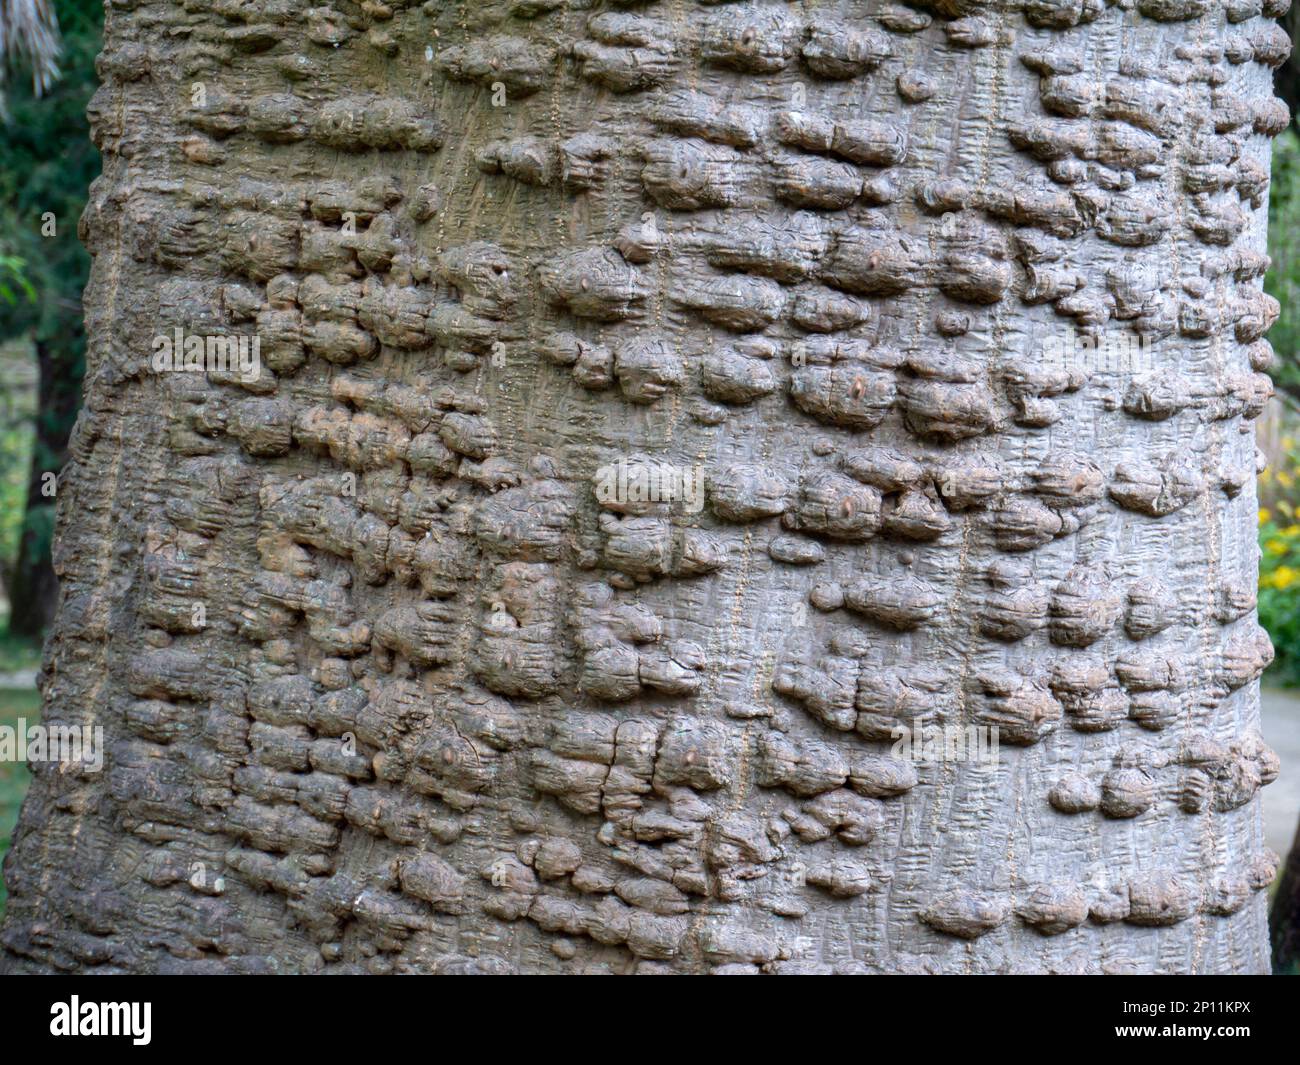 Erythrina caffra, coast coral tree or African coral tree. Trunk with prickles on the bark closeup. Stock Photo